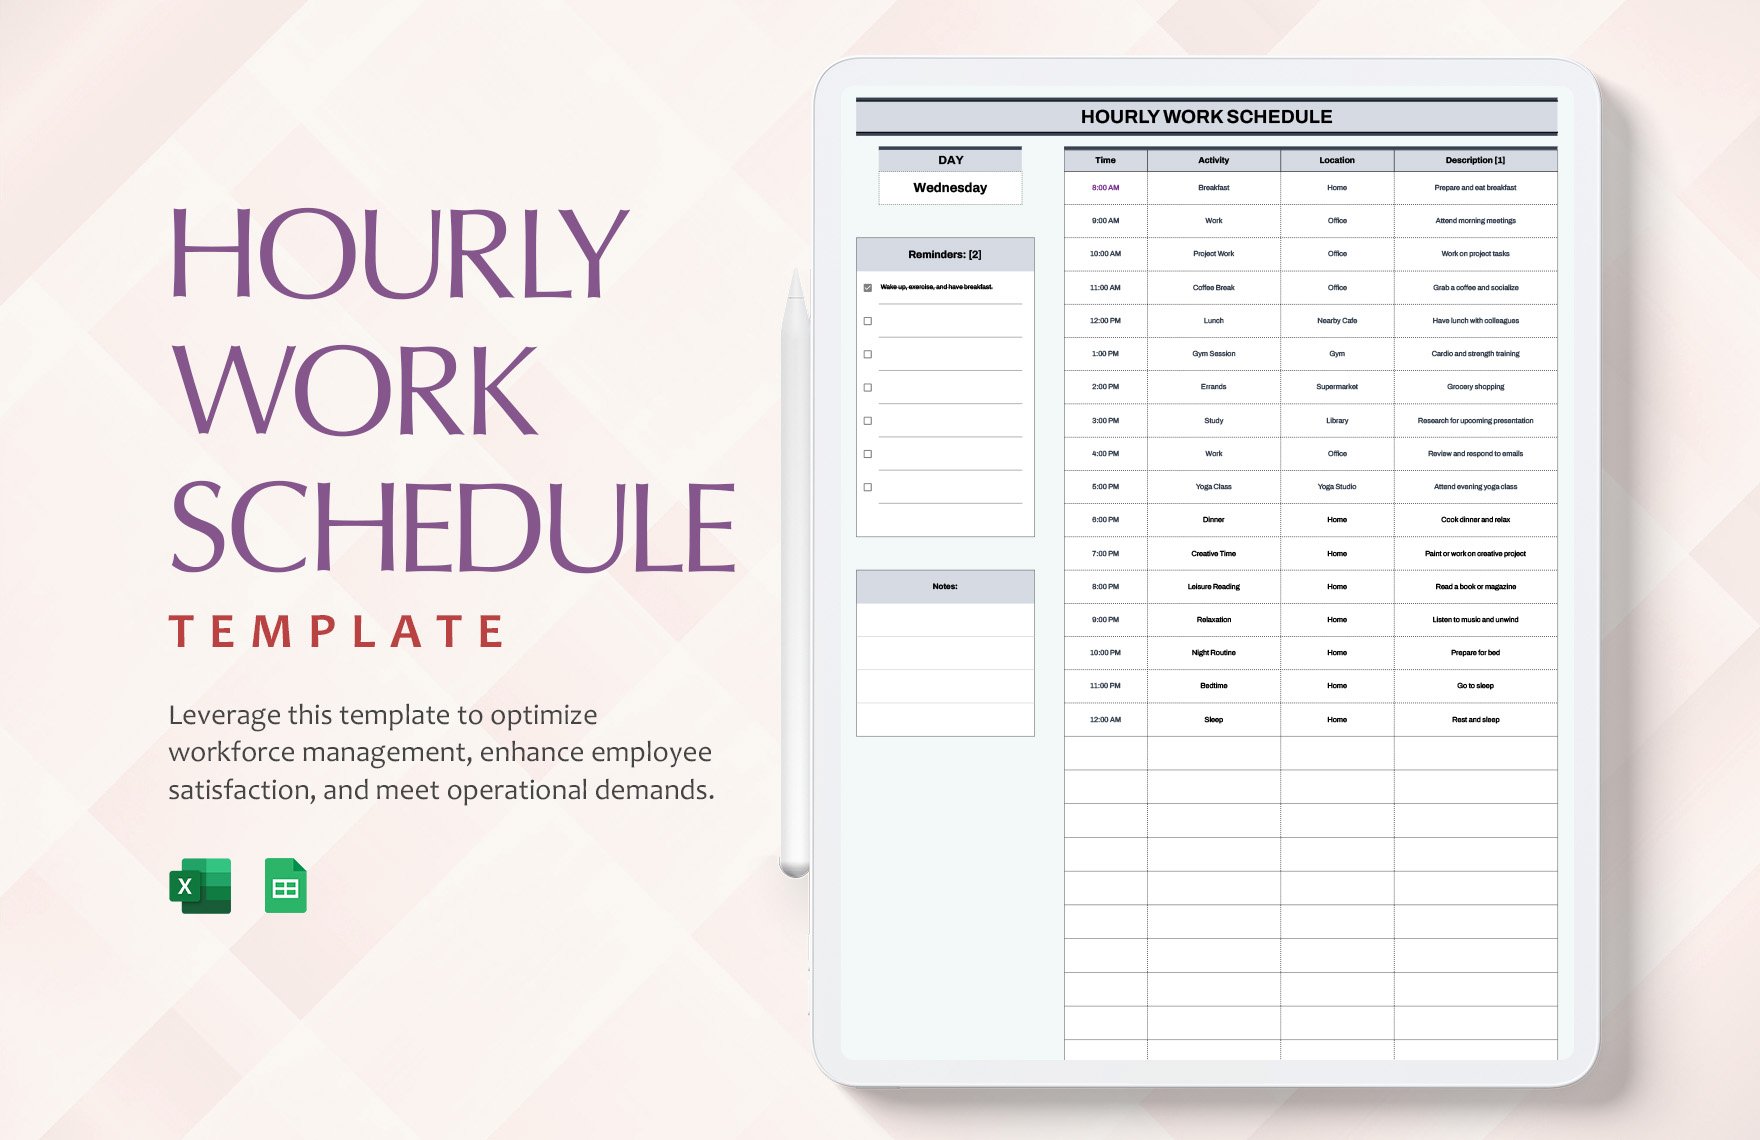 Hourly Work Schedule Template in Excel, Google Sheets